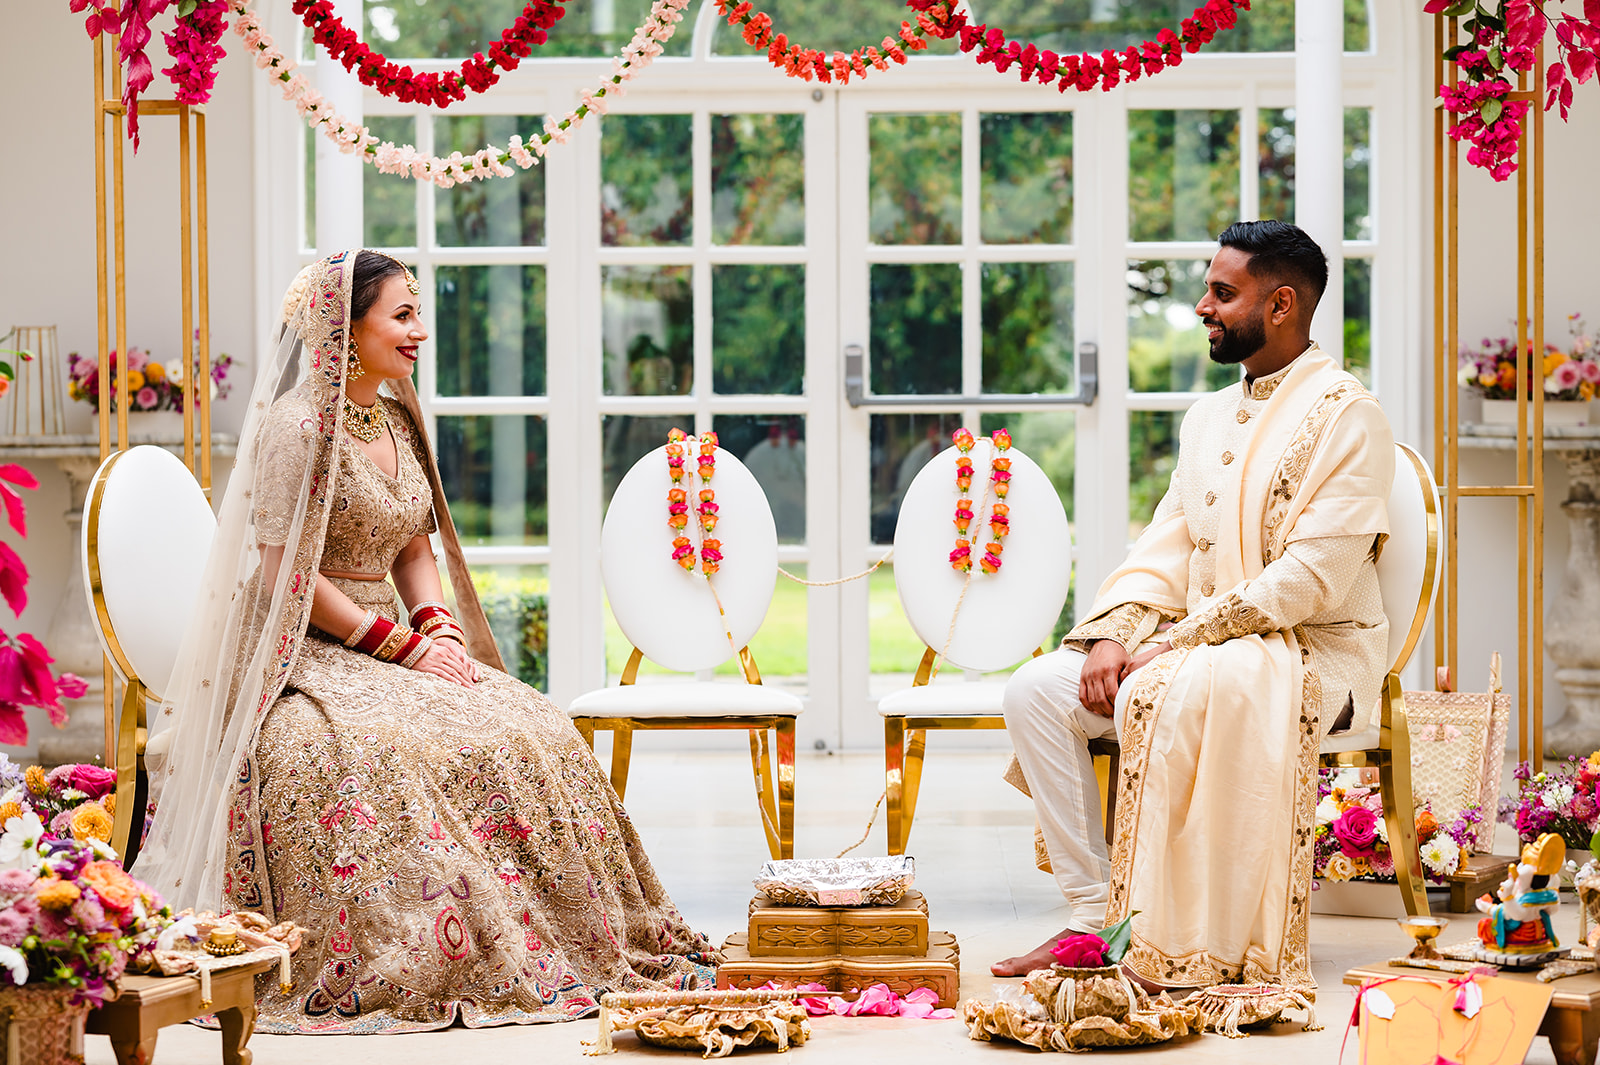 Mandup set up with bride and groom during indian wedding ceremony photoshoot by Amanda Forman Photography